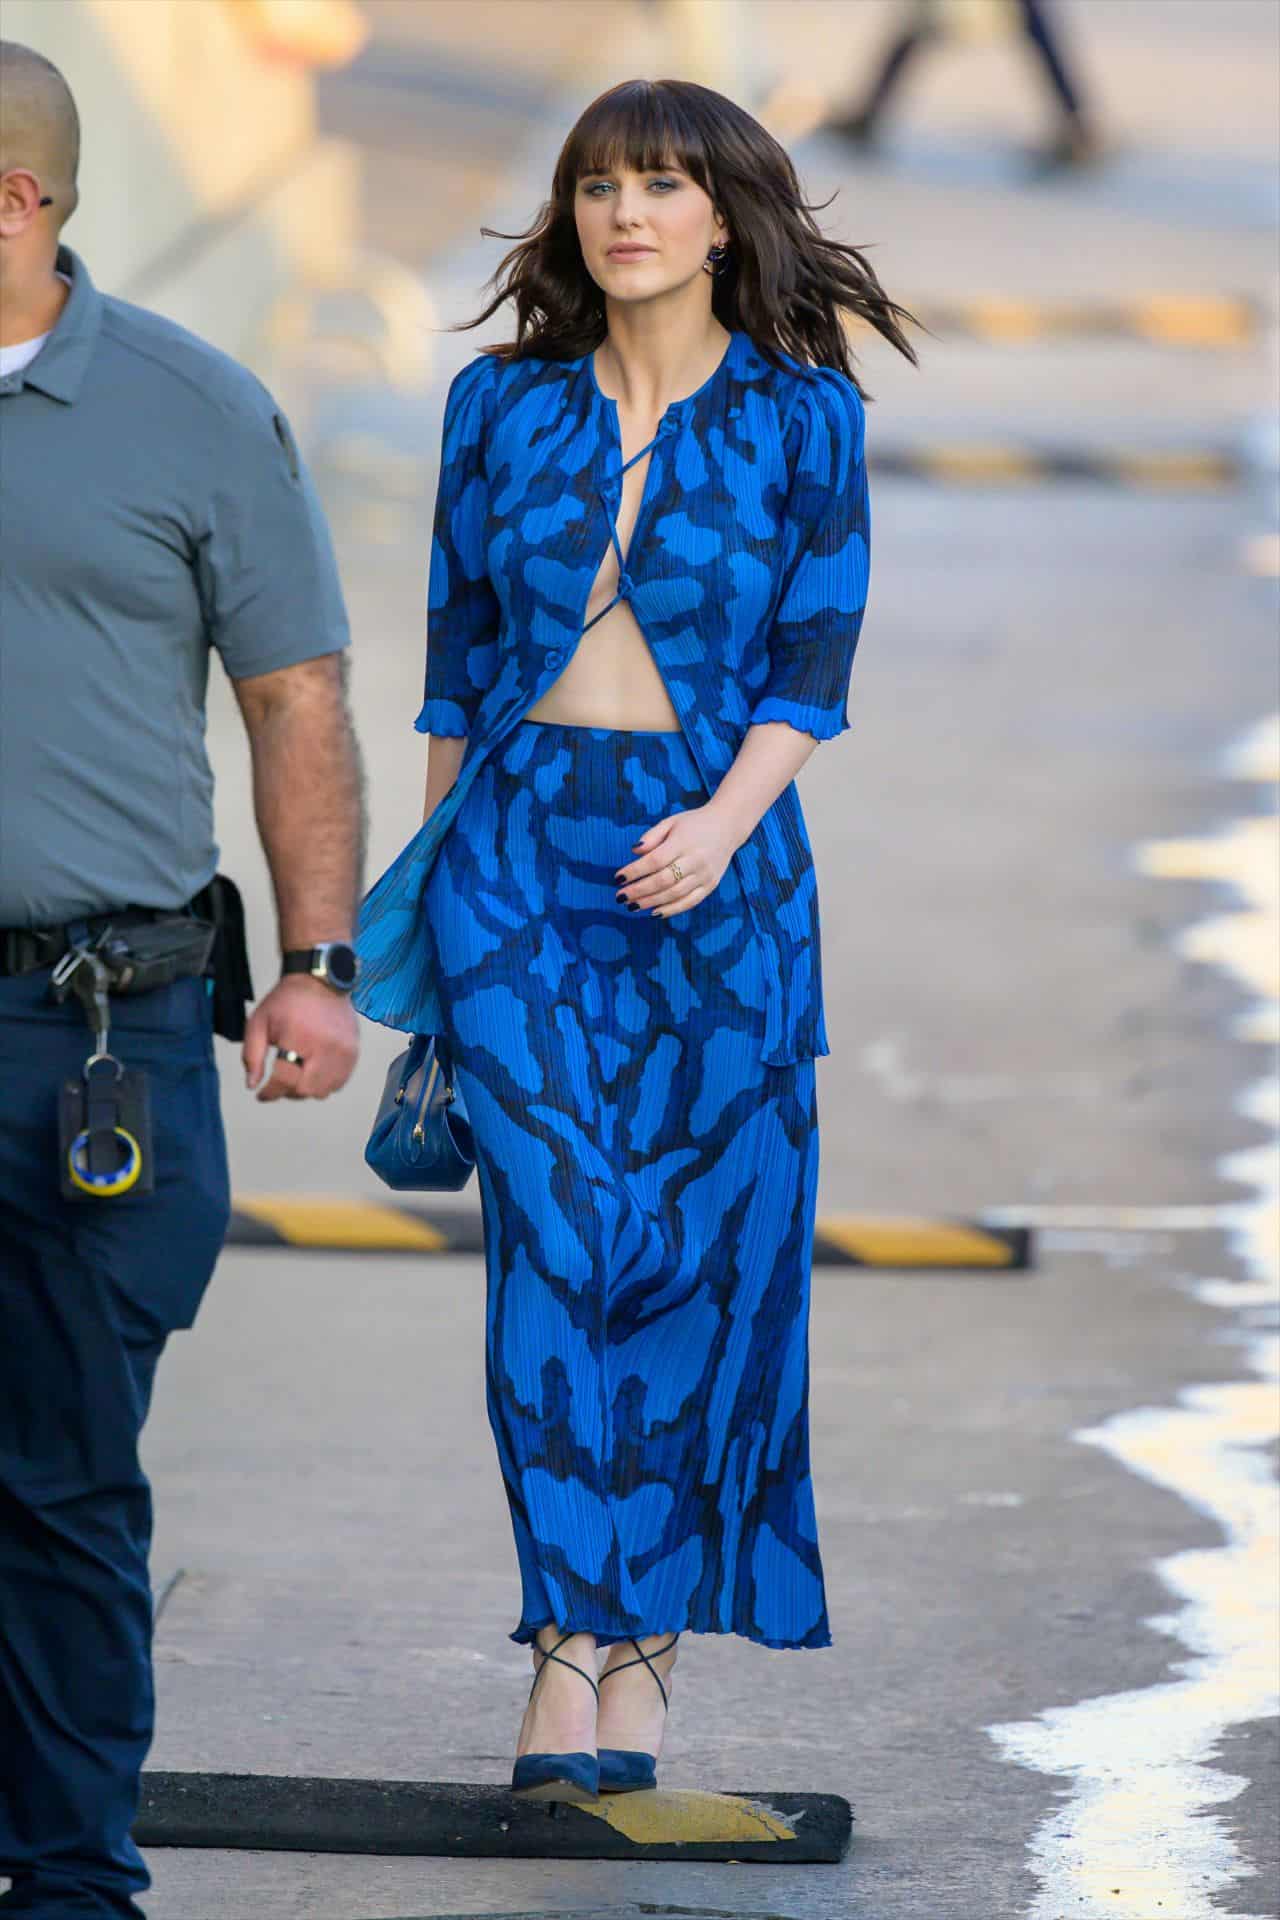 Rachel Brosnahan Stuns in a One-of-a-kind Blue Outfit at Jimmy Kimmel Live